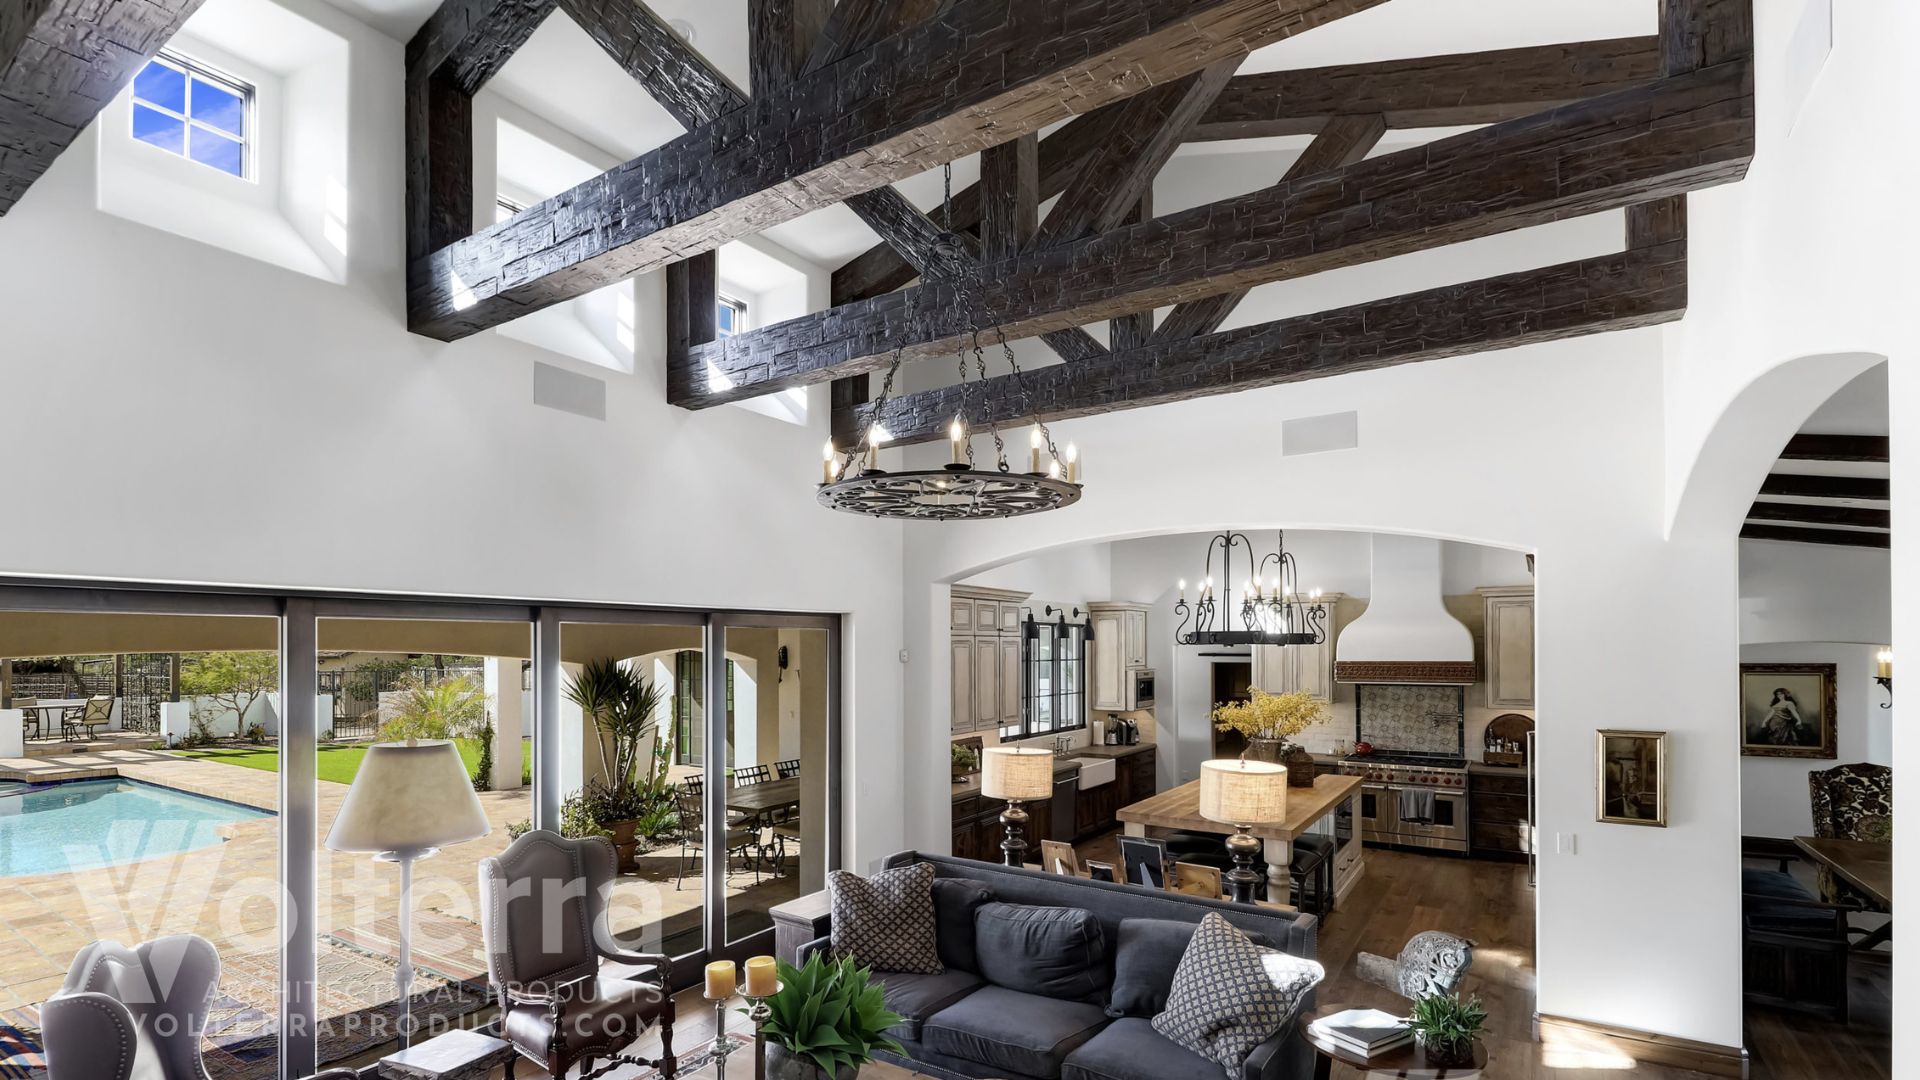 How to Choose the Right Wood for Your Decorative Ceiling Beams